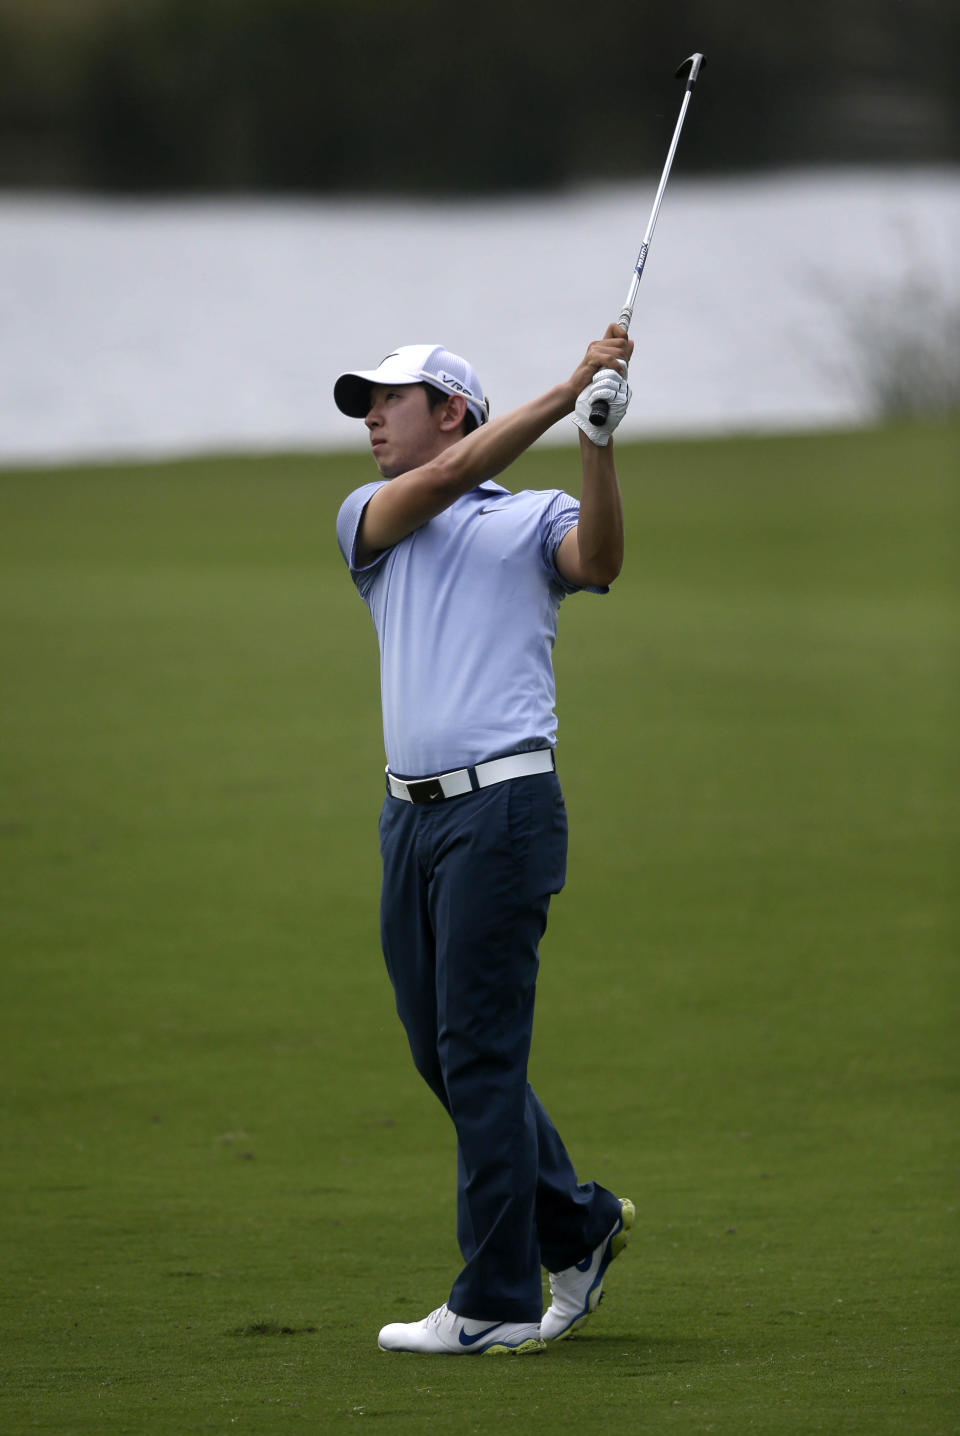 Noh Seung-yul of South Korea hits on the 18th fairway during the second round of the Zurich Classic golf tournament at TPC Louisiana in Avondale, La., Friday, April 25, 2014. (AP Photo/Gerald Herbert)